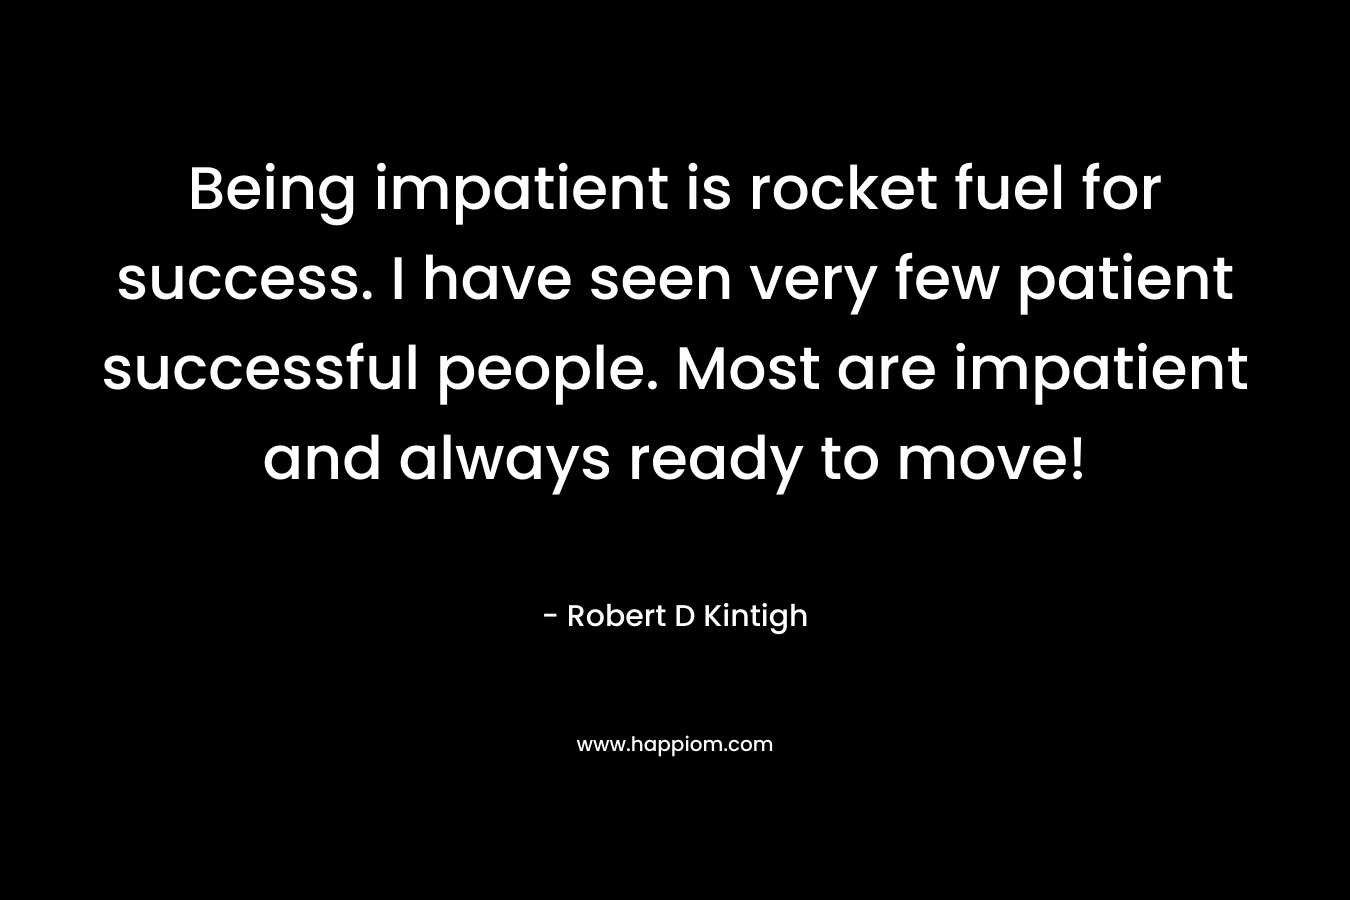 Being impatient is rocket fuel for success. I have seen very few patient successful people. Most are impatient and always ready to move! – Robert D Kintigh